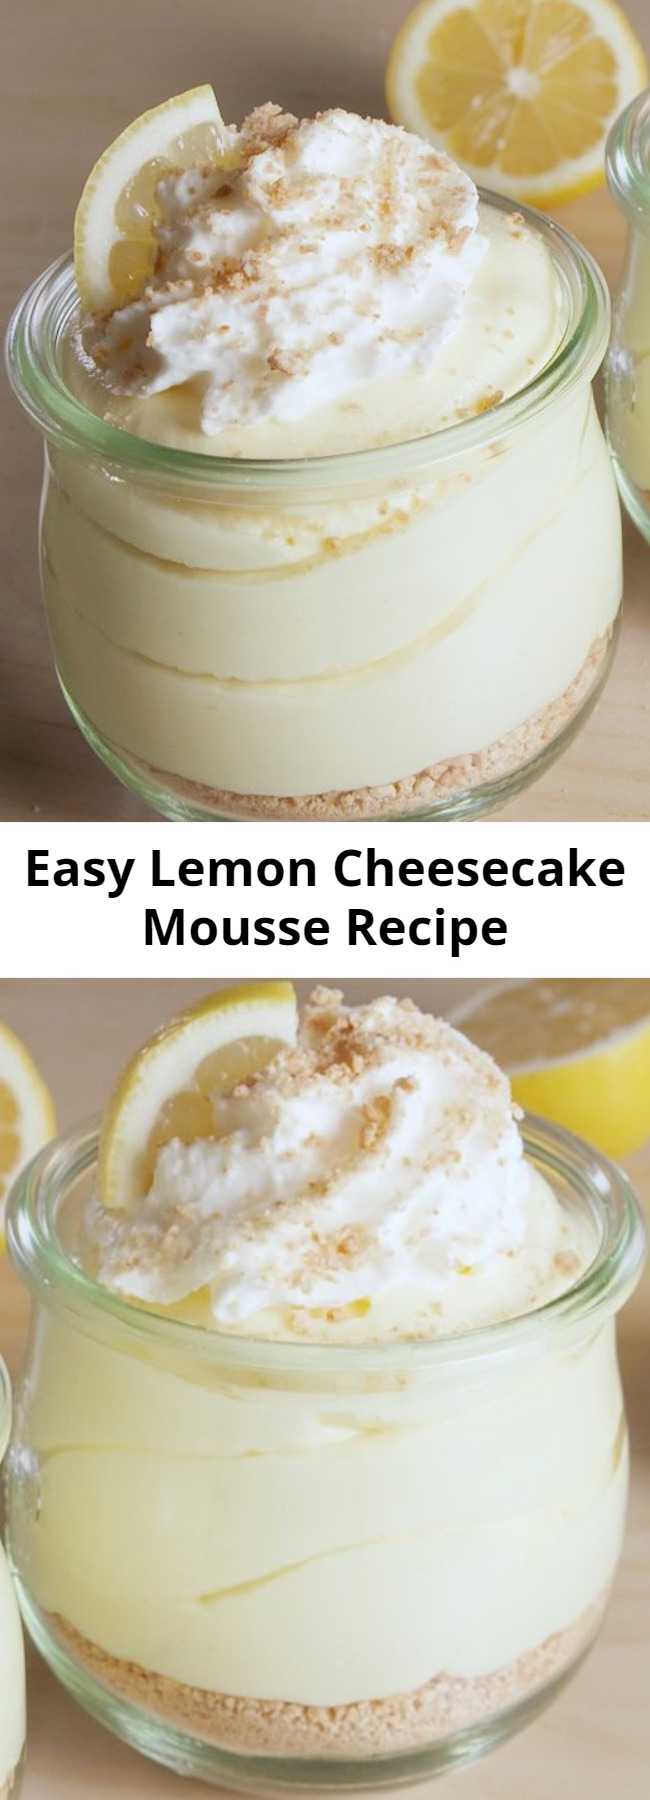 Easy Lemon Cheesecake Mousse Recipe - Vegetarian · The perfect combo of sweet and tart! Picture perfect! #sweet #tart #lemon #cheesecake #mousse #dessert #easyrecipe #recipe #fruity